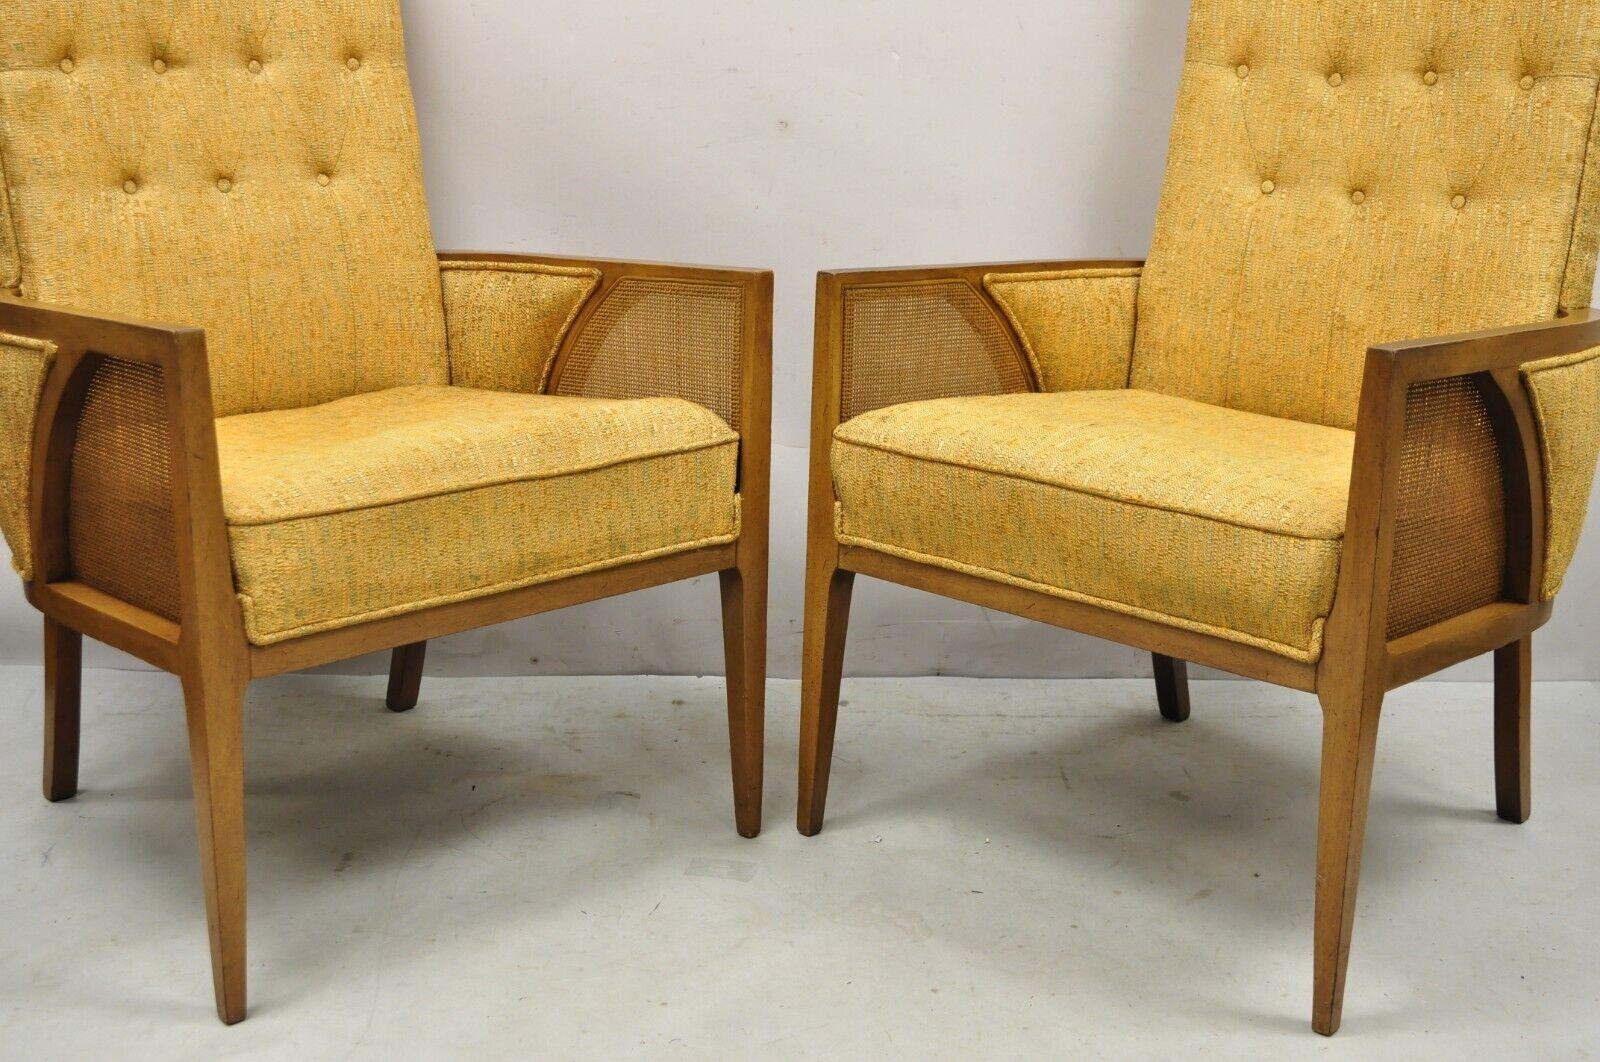 Mid Century Hollywood Regency Sculpted Wood Cane Panel Lounge Chairs - a Pair In Good Condition For Sale In Philadelphia, PA